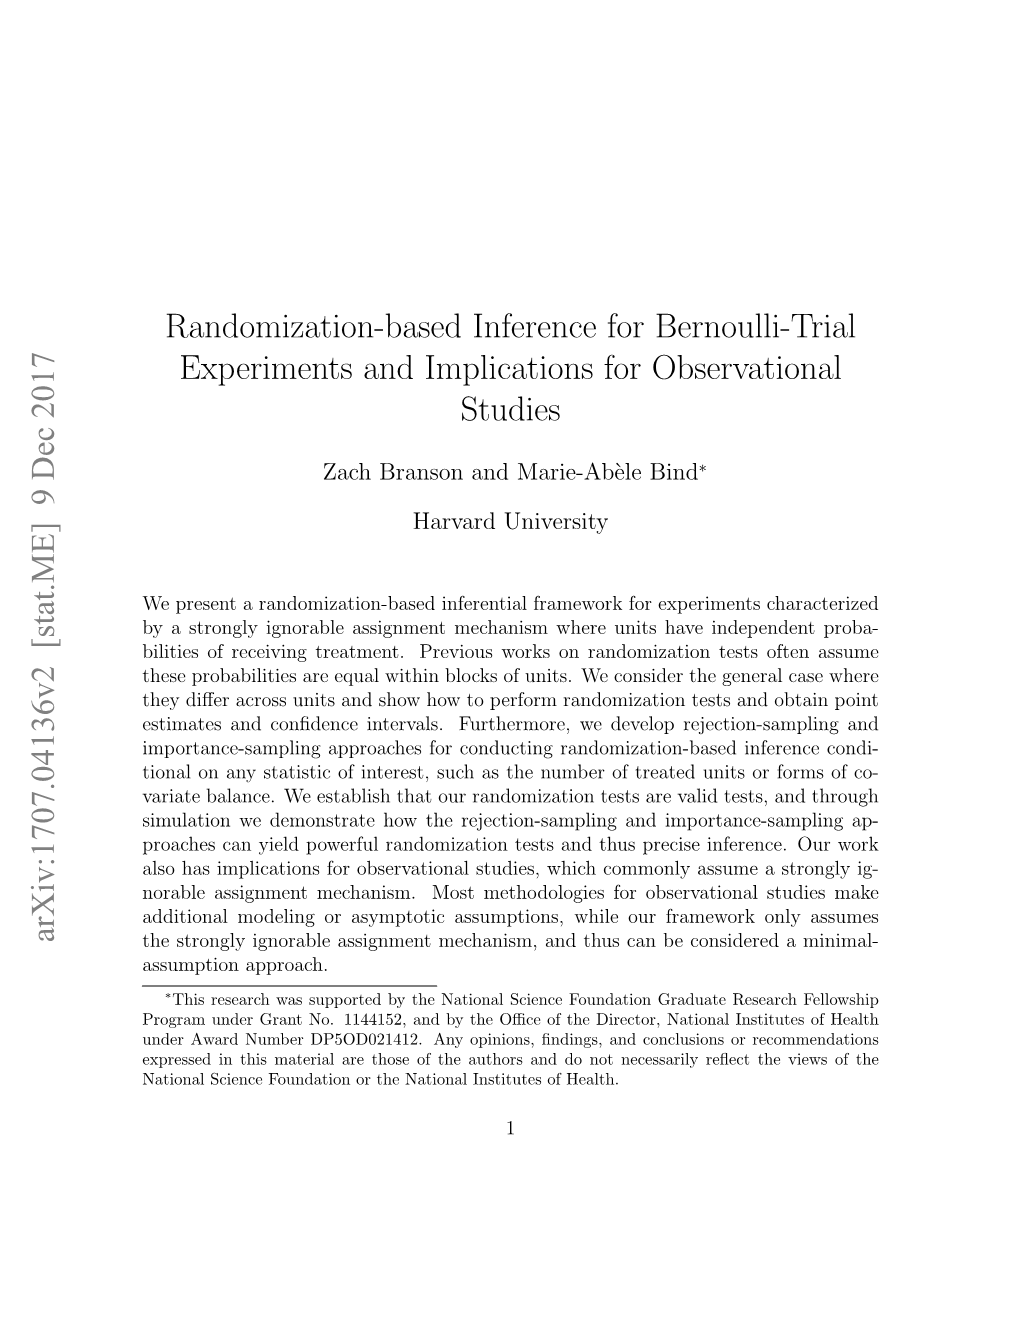 Randomization-Based Inference for Bernoulli-Trial Experiments and Implications for Observational Studies